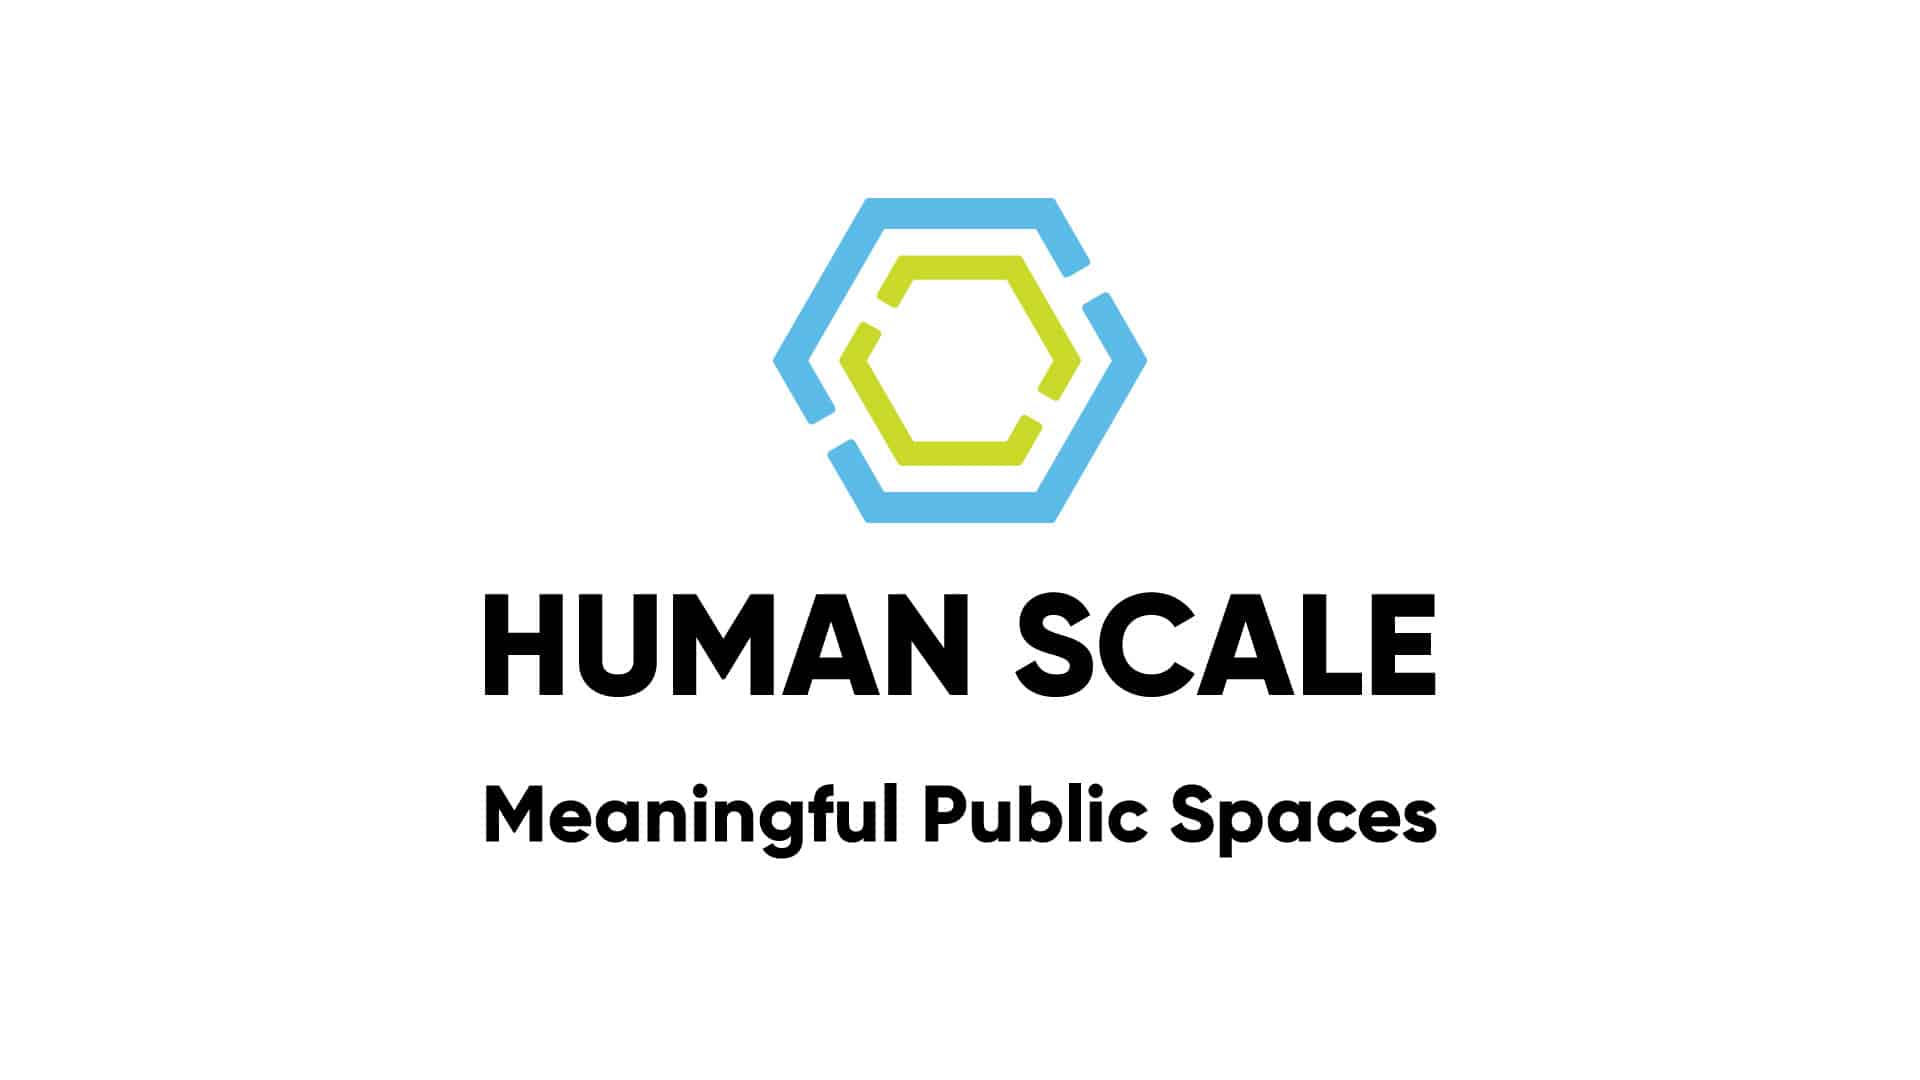 https://humanscale.org/wp-content/uploads/2022/04/Human-Scale-Meaningful-Public-Spaces-Chicago.jpg